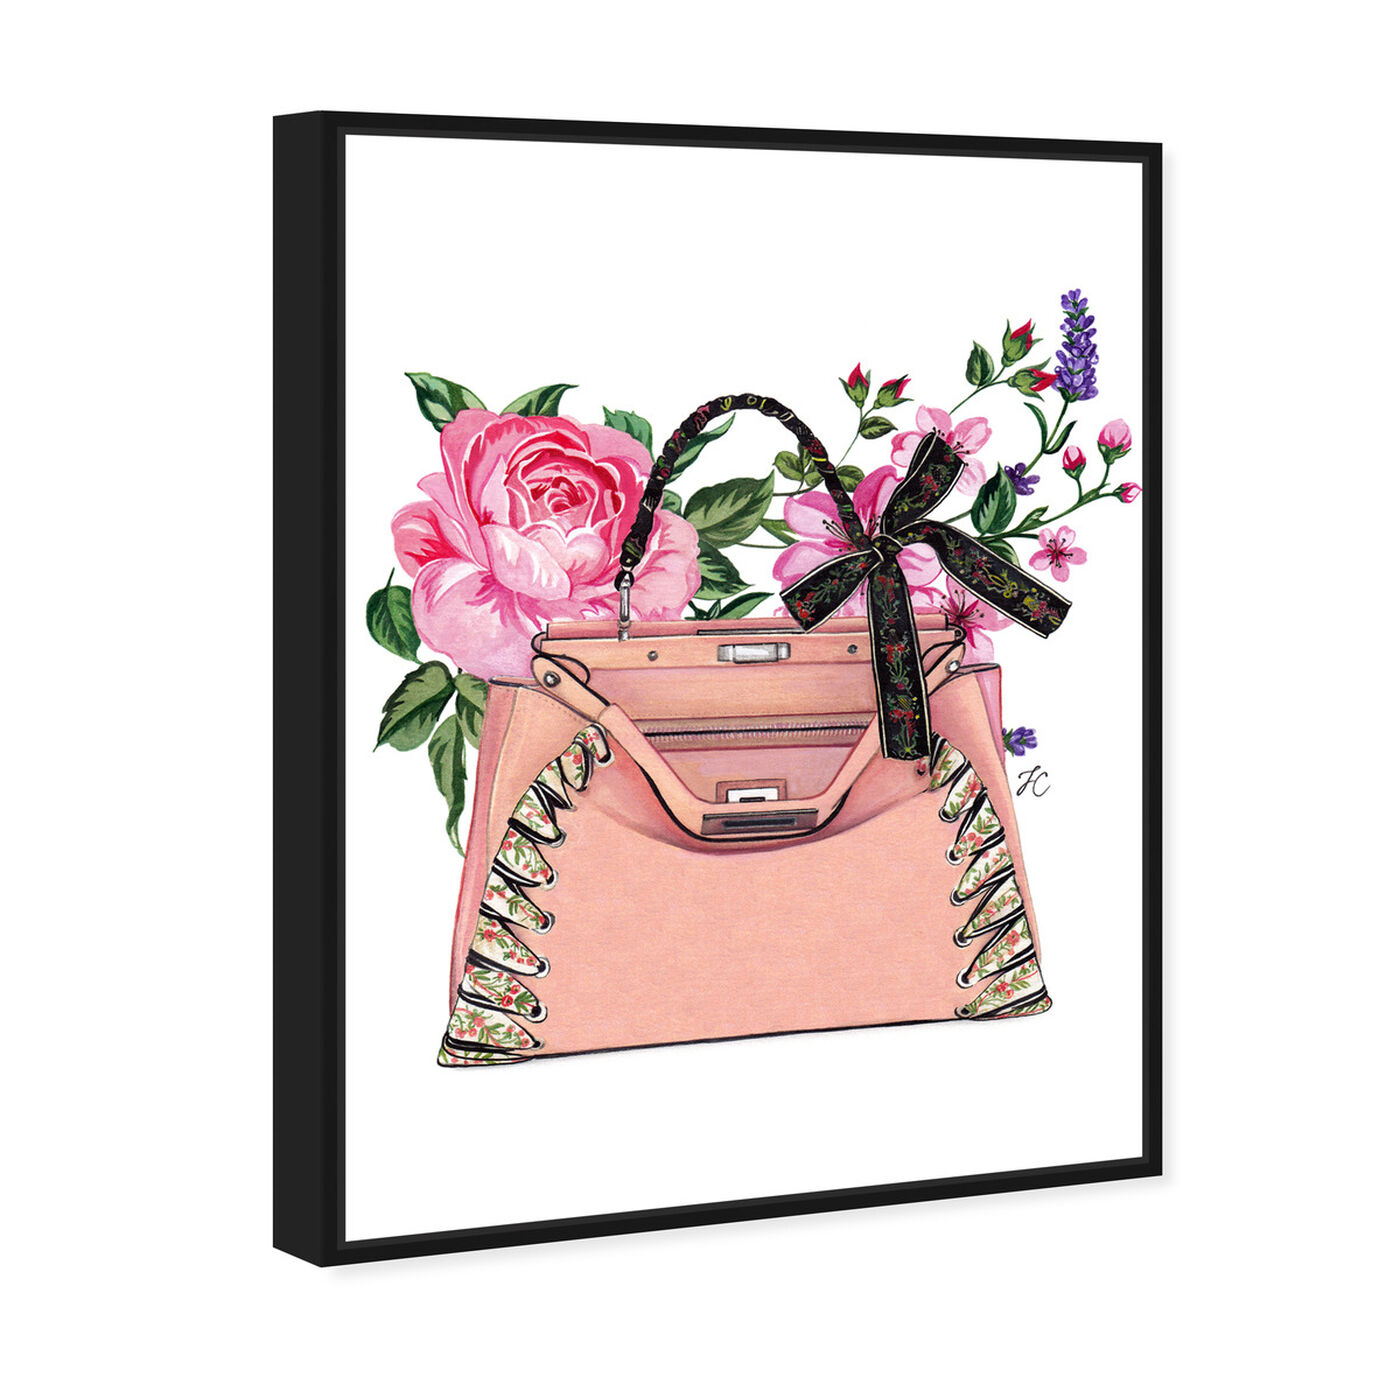 Angled view of Doll Memories - Pink roses featuring fashion and glam and handbags art.